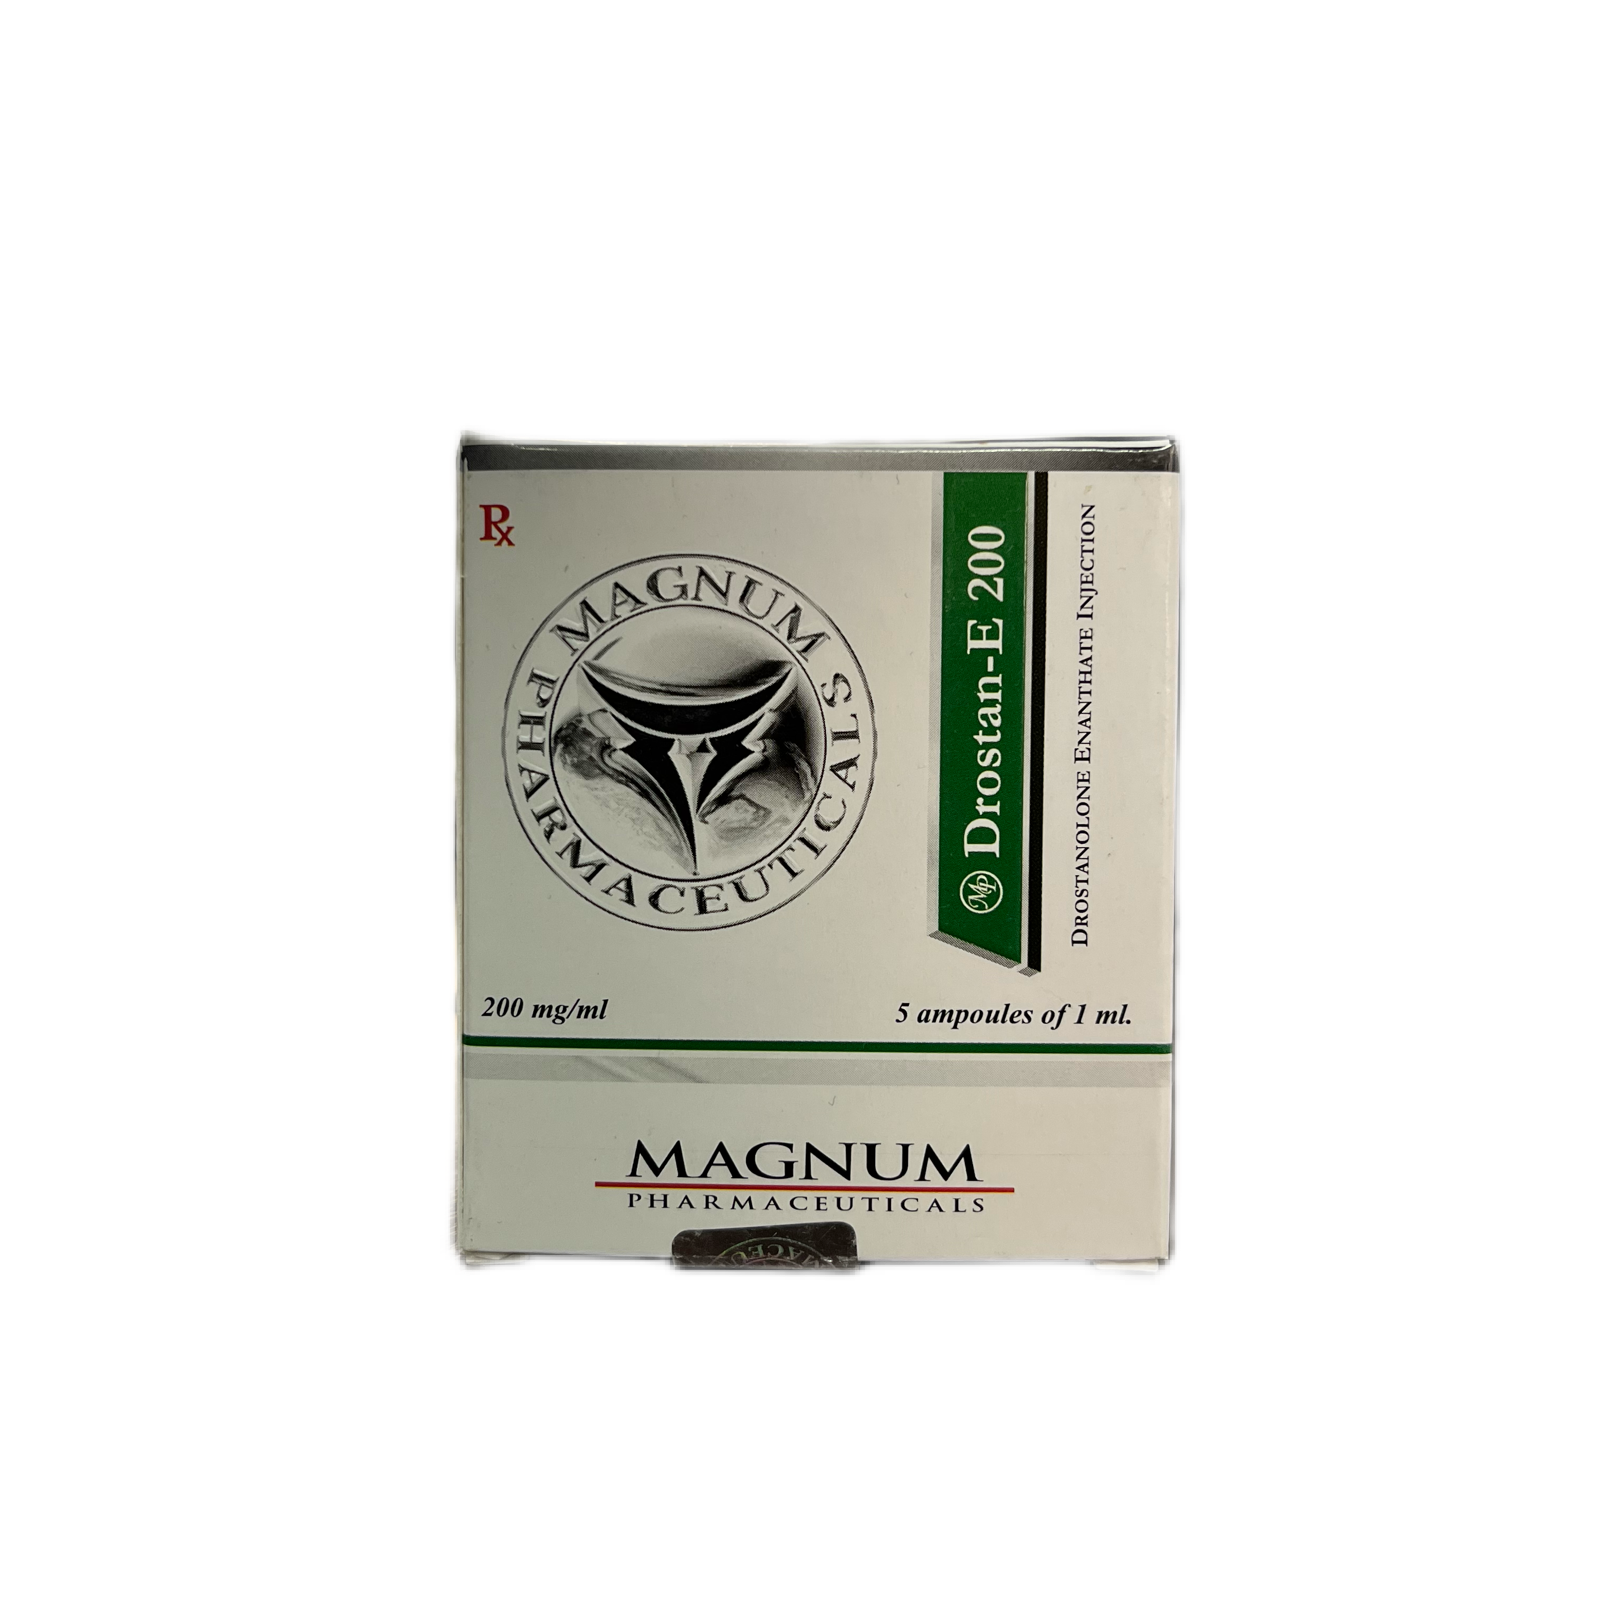 Drostanolone Enanthate 200 (Magnum) 5 Аmpoules